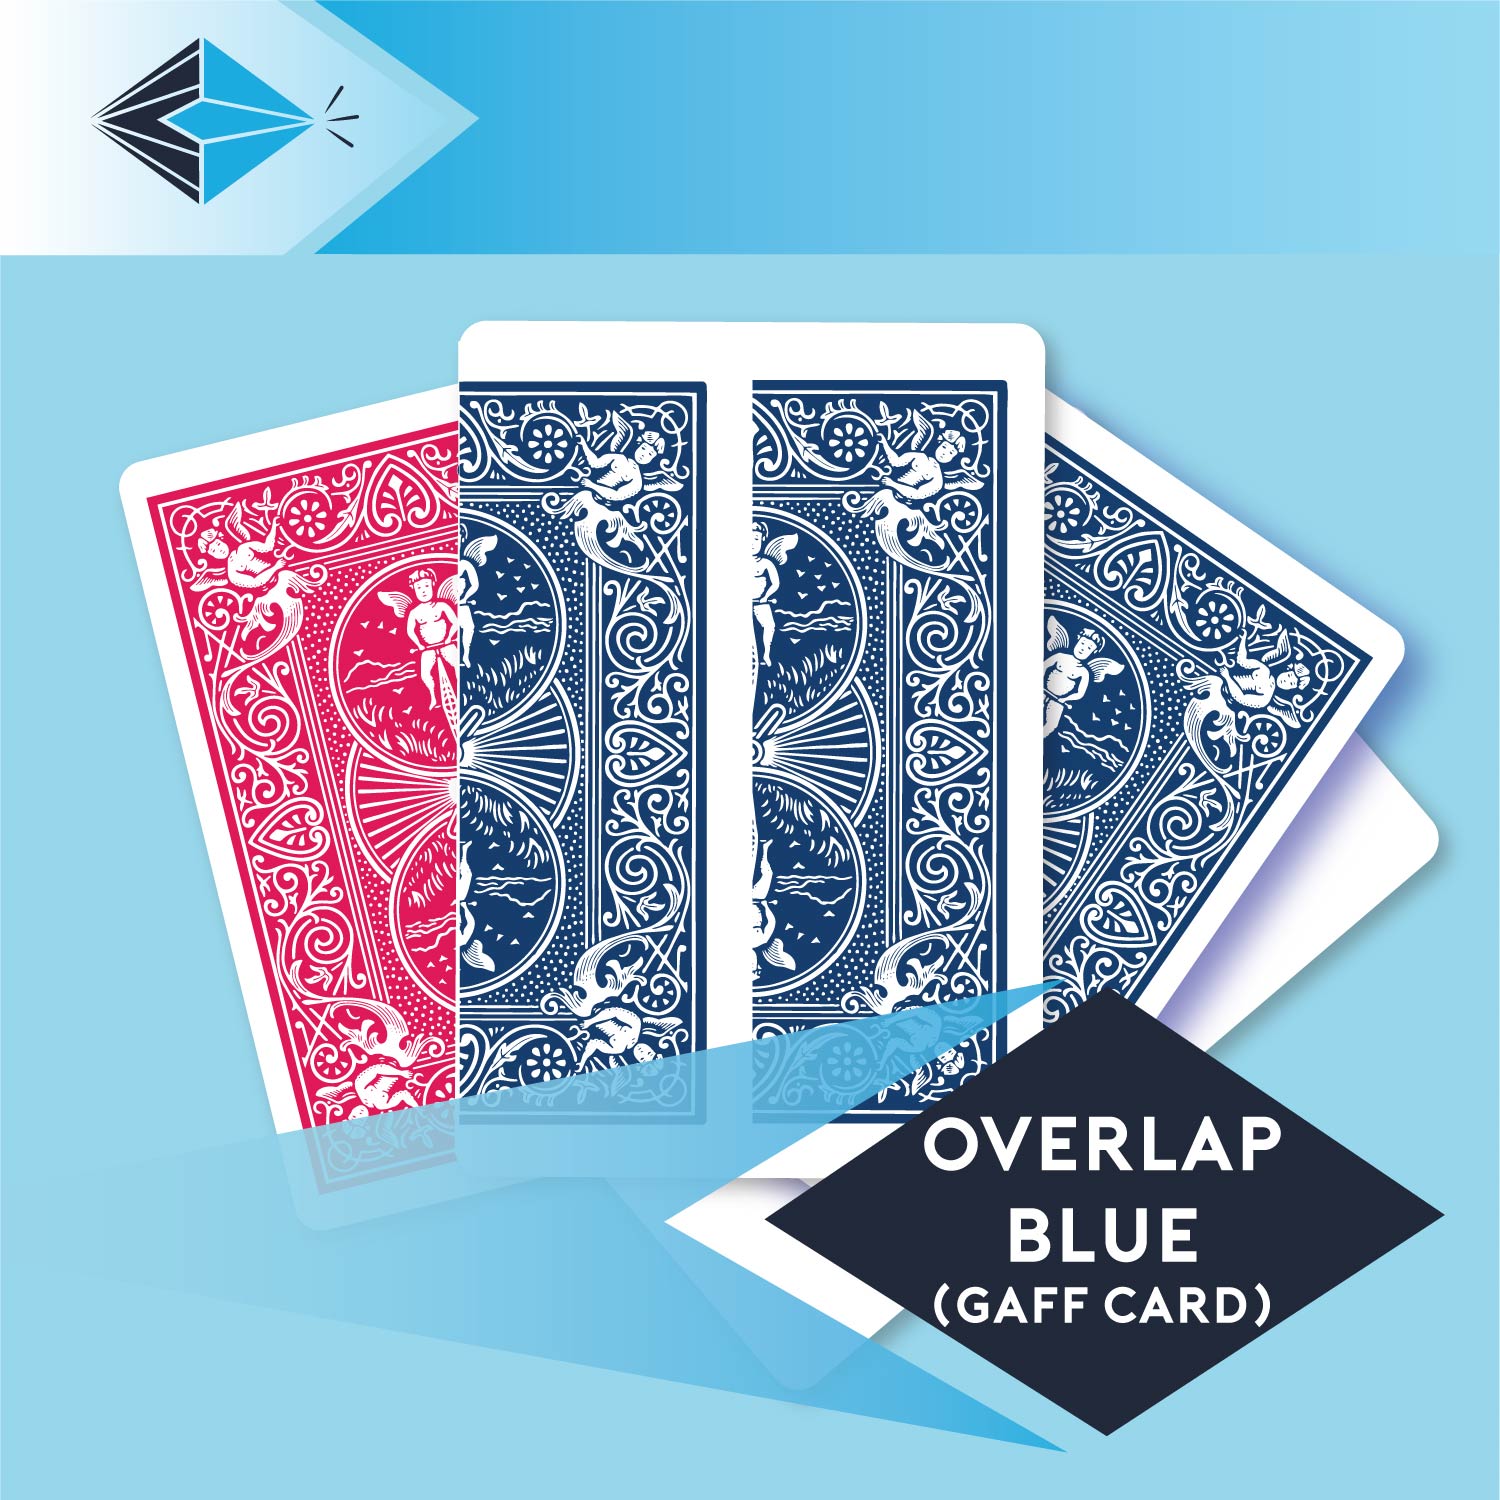 Overlap Blue gaff card 30 playing card for magicians printing printers Stockport Manchester UK